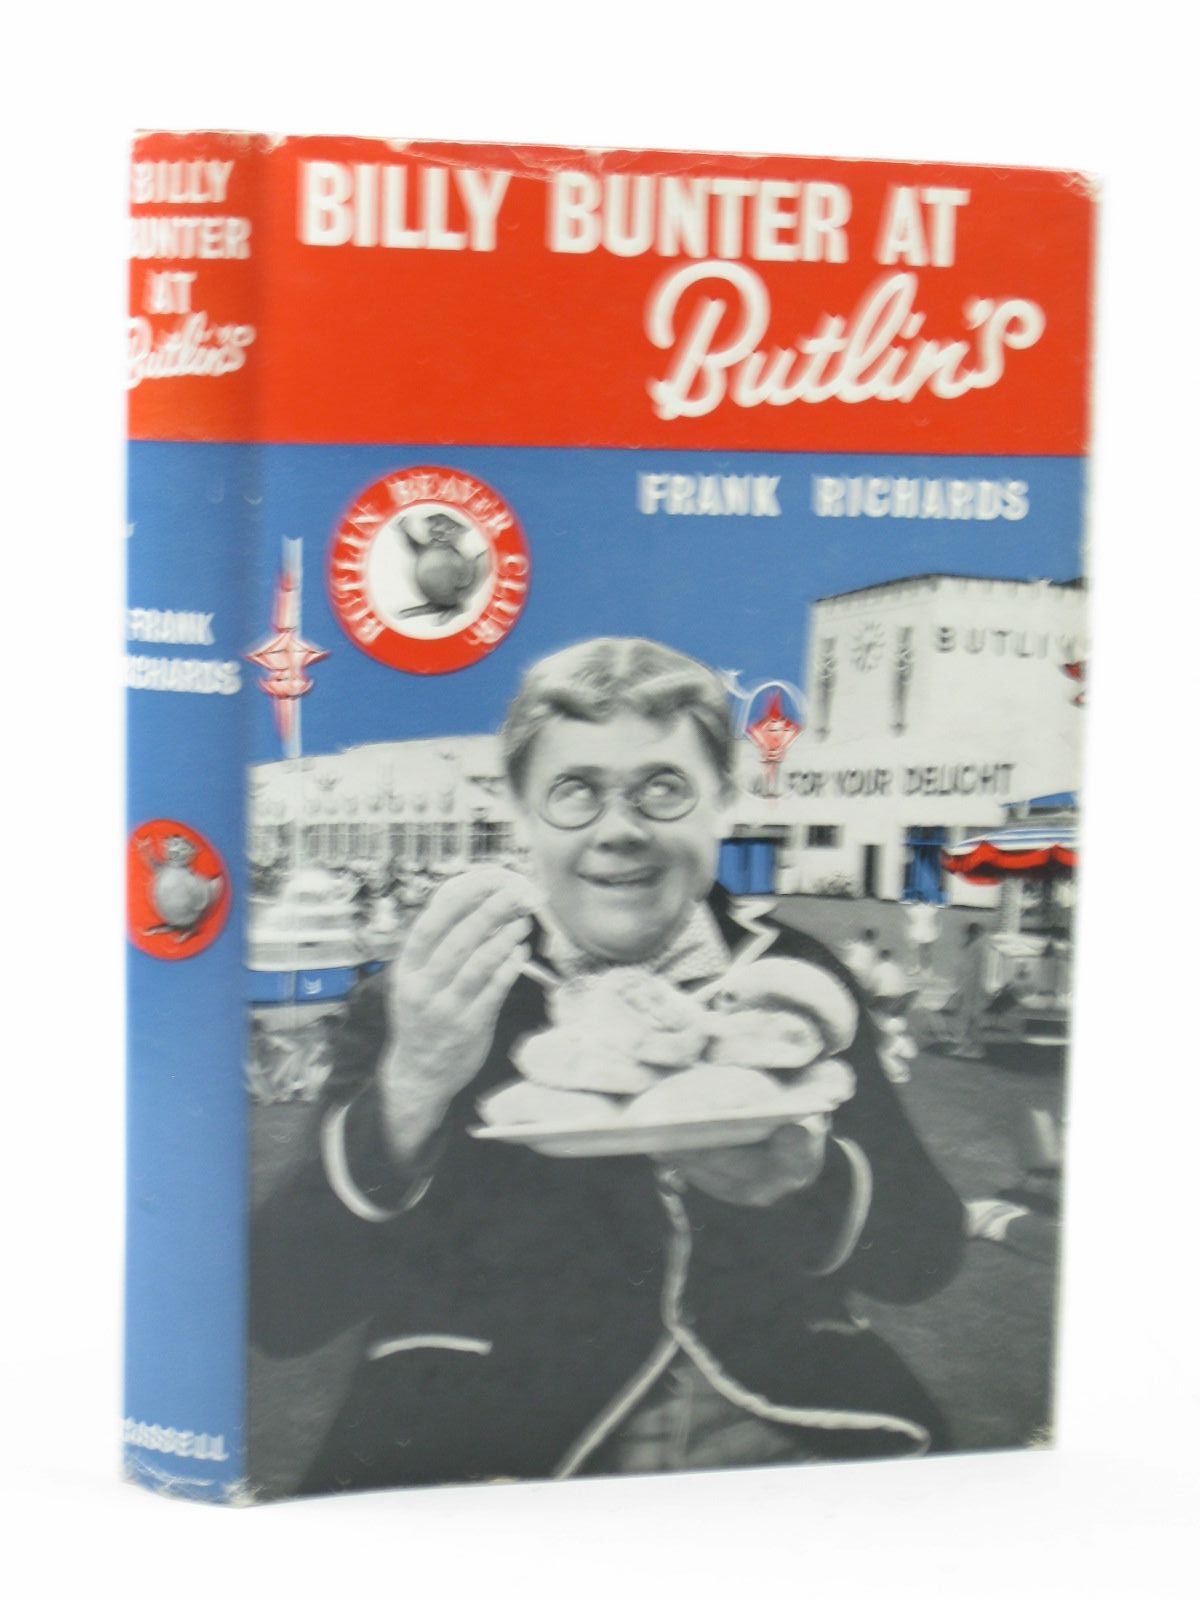 Cover of BILLY BUNTER AT BUTLIN'S by Frank Richards